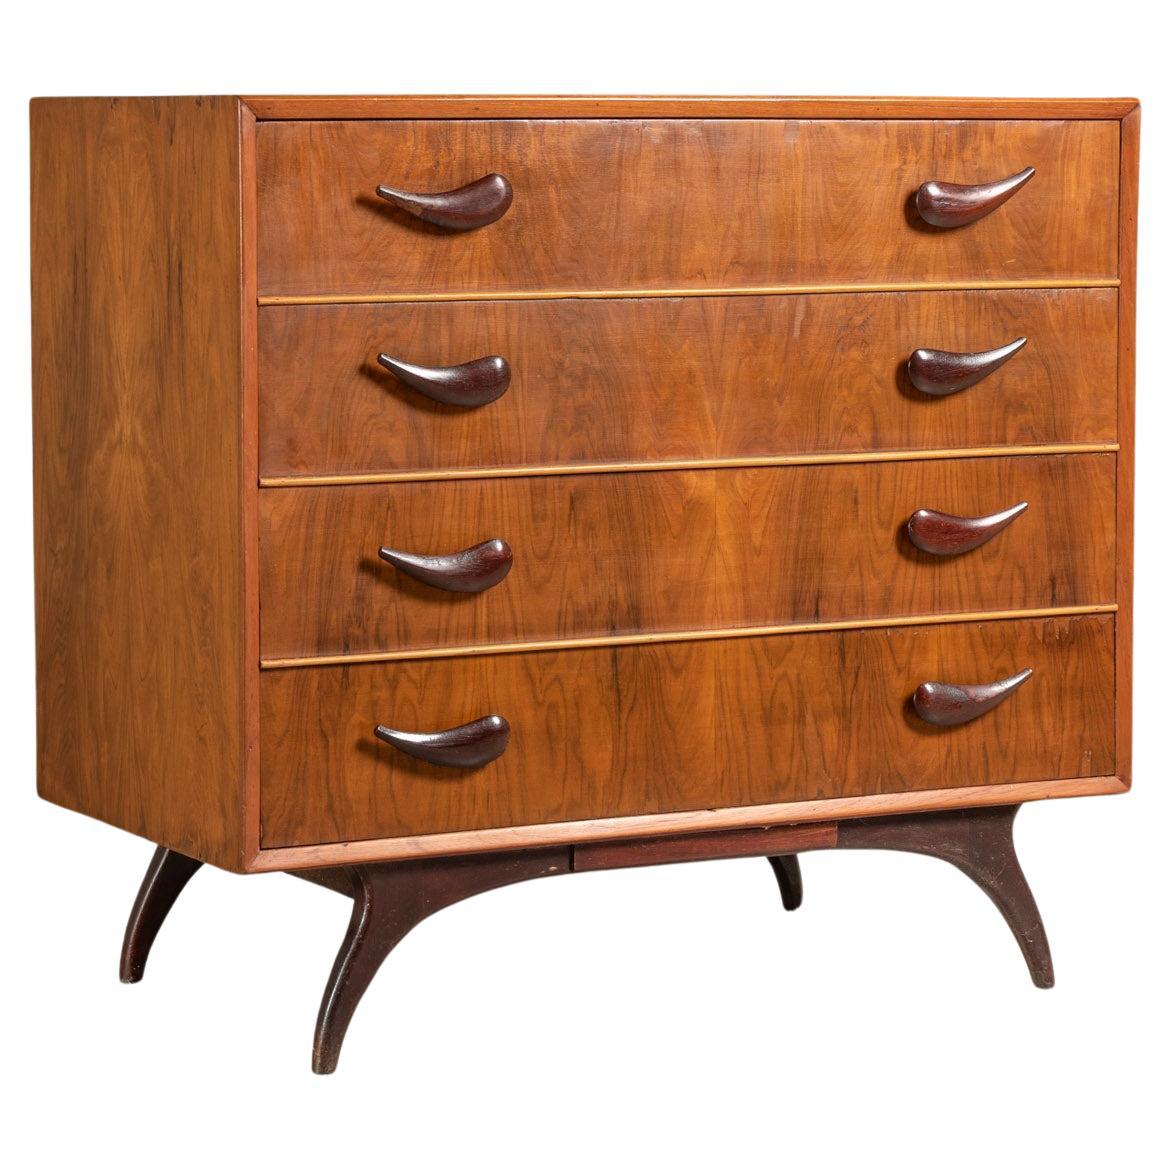 Chest of Drawers in Solid Hardwood, by Móveis Cimo, Brazilian Mid-Century Modern For Sale